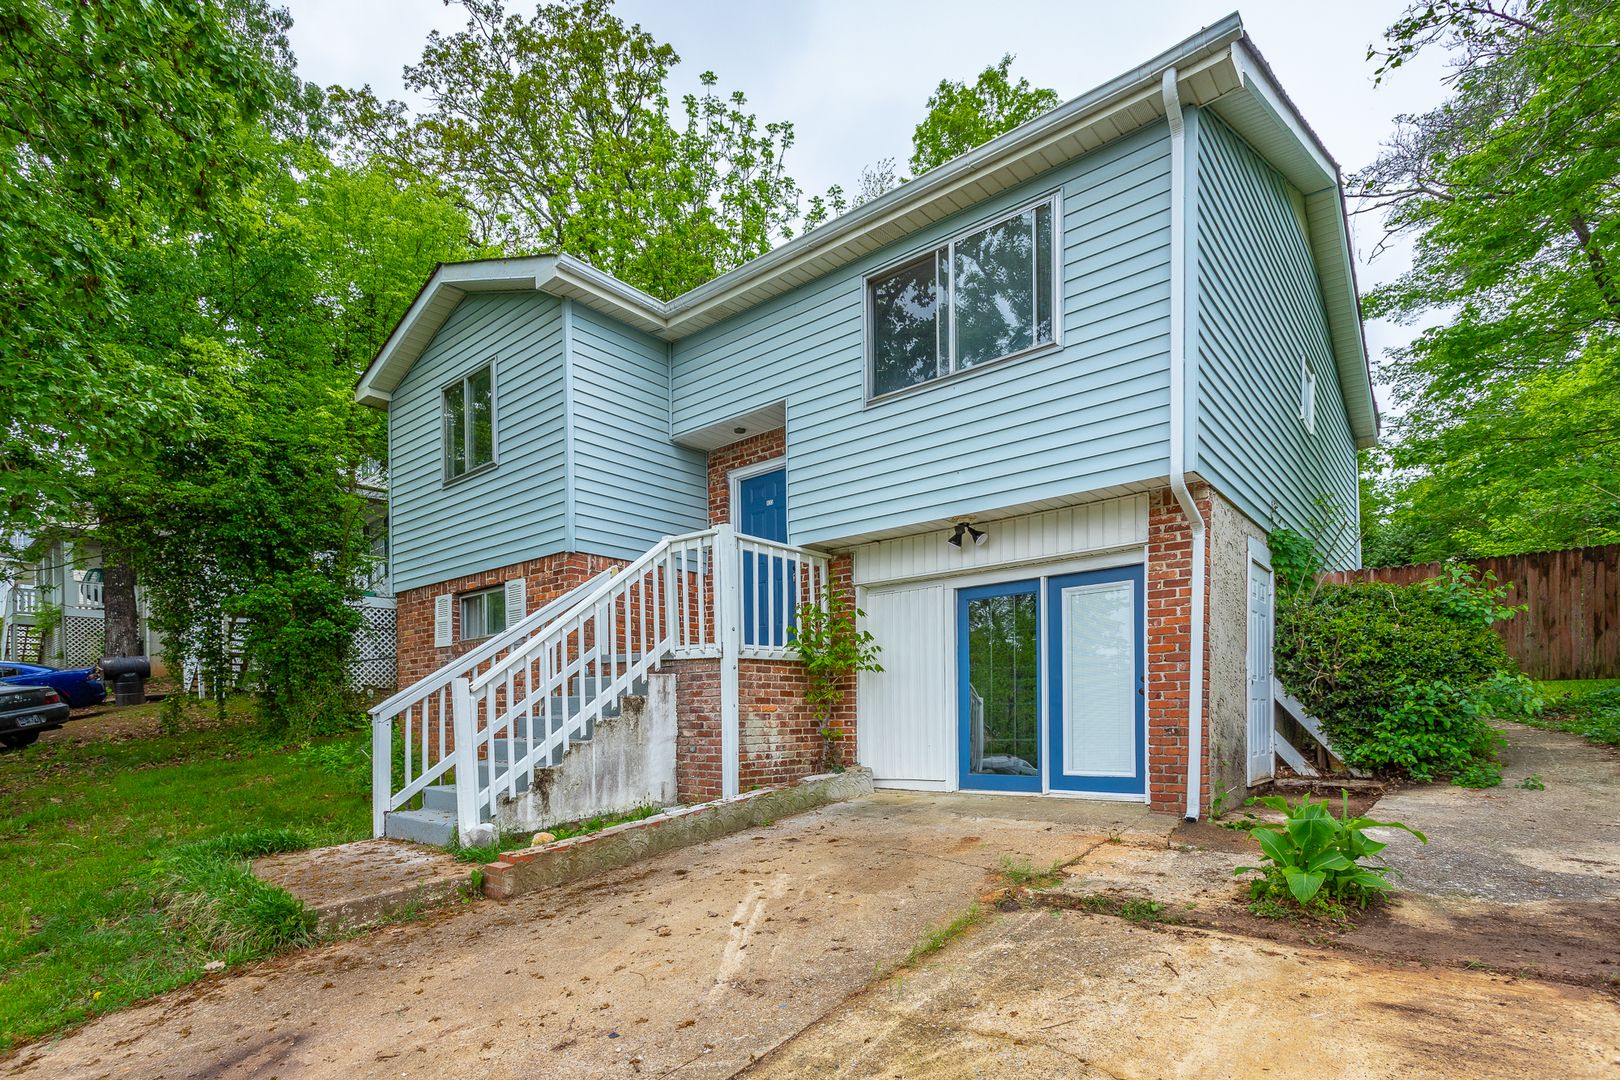 Welcome to 833 Sylvan Drive, a 4 bedroom, 2 bathroom rental nestled in the heart of Chattanooga, TN!